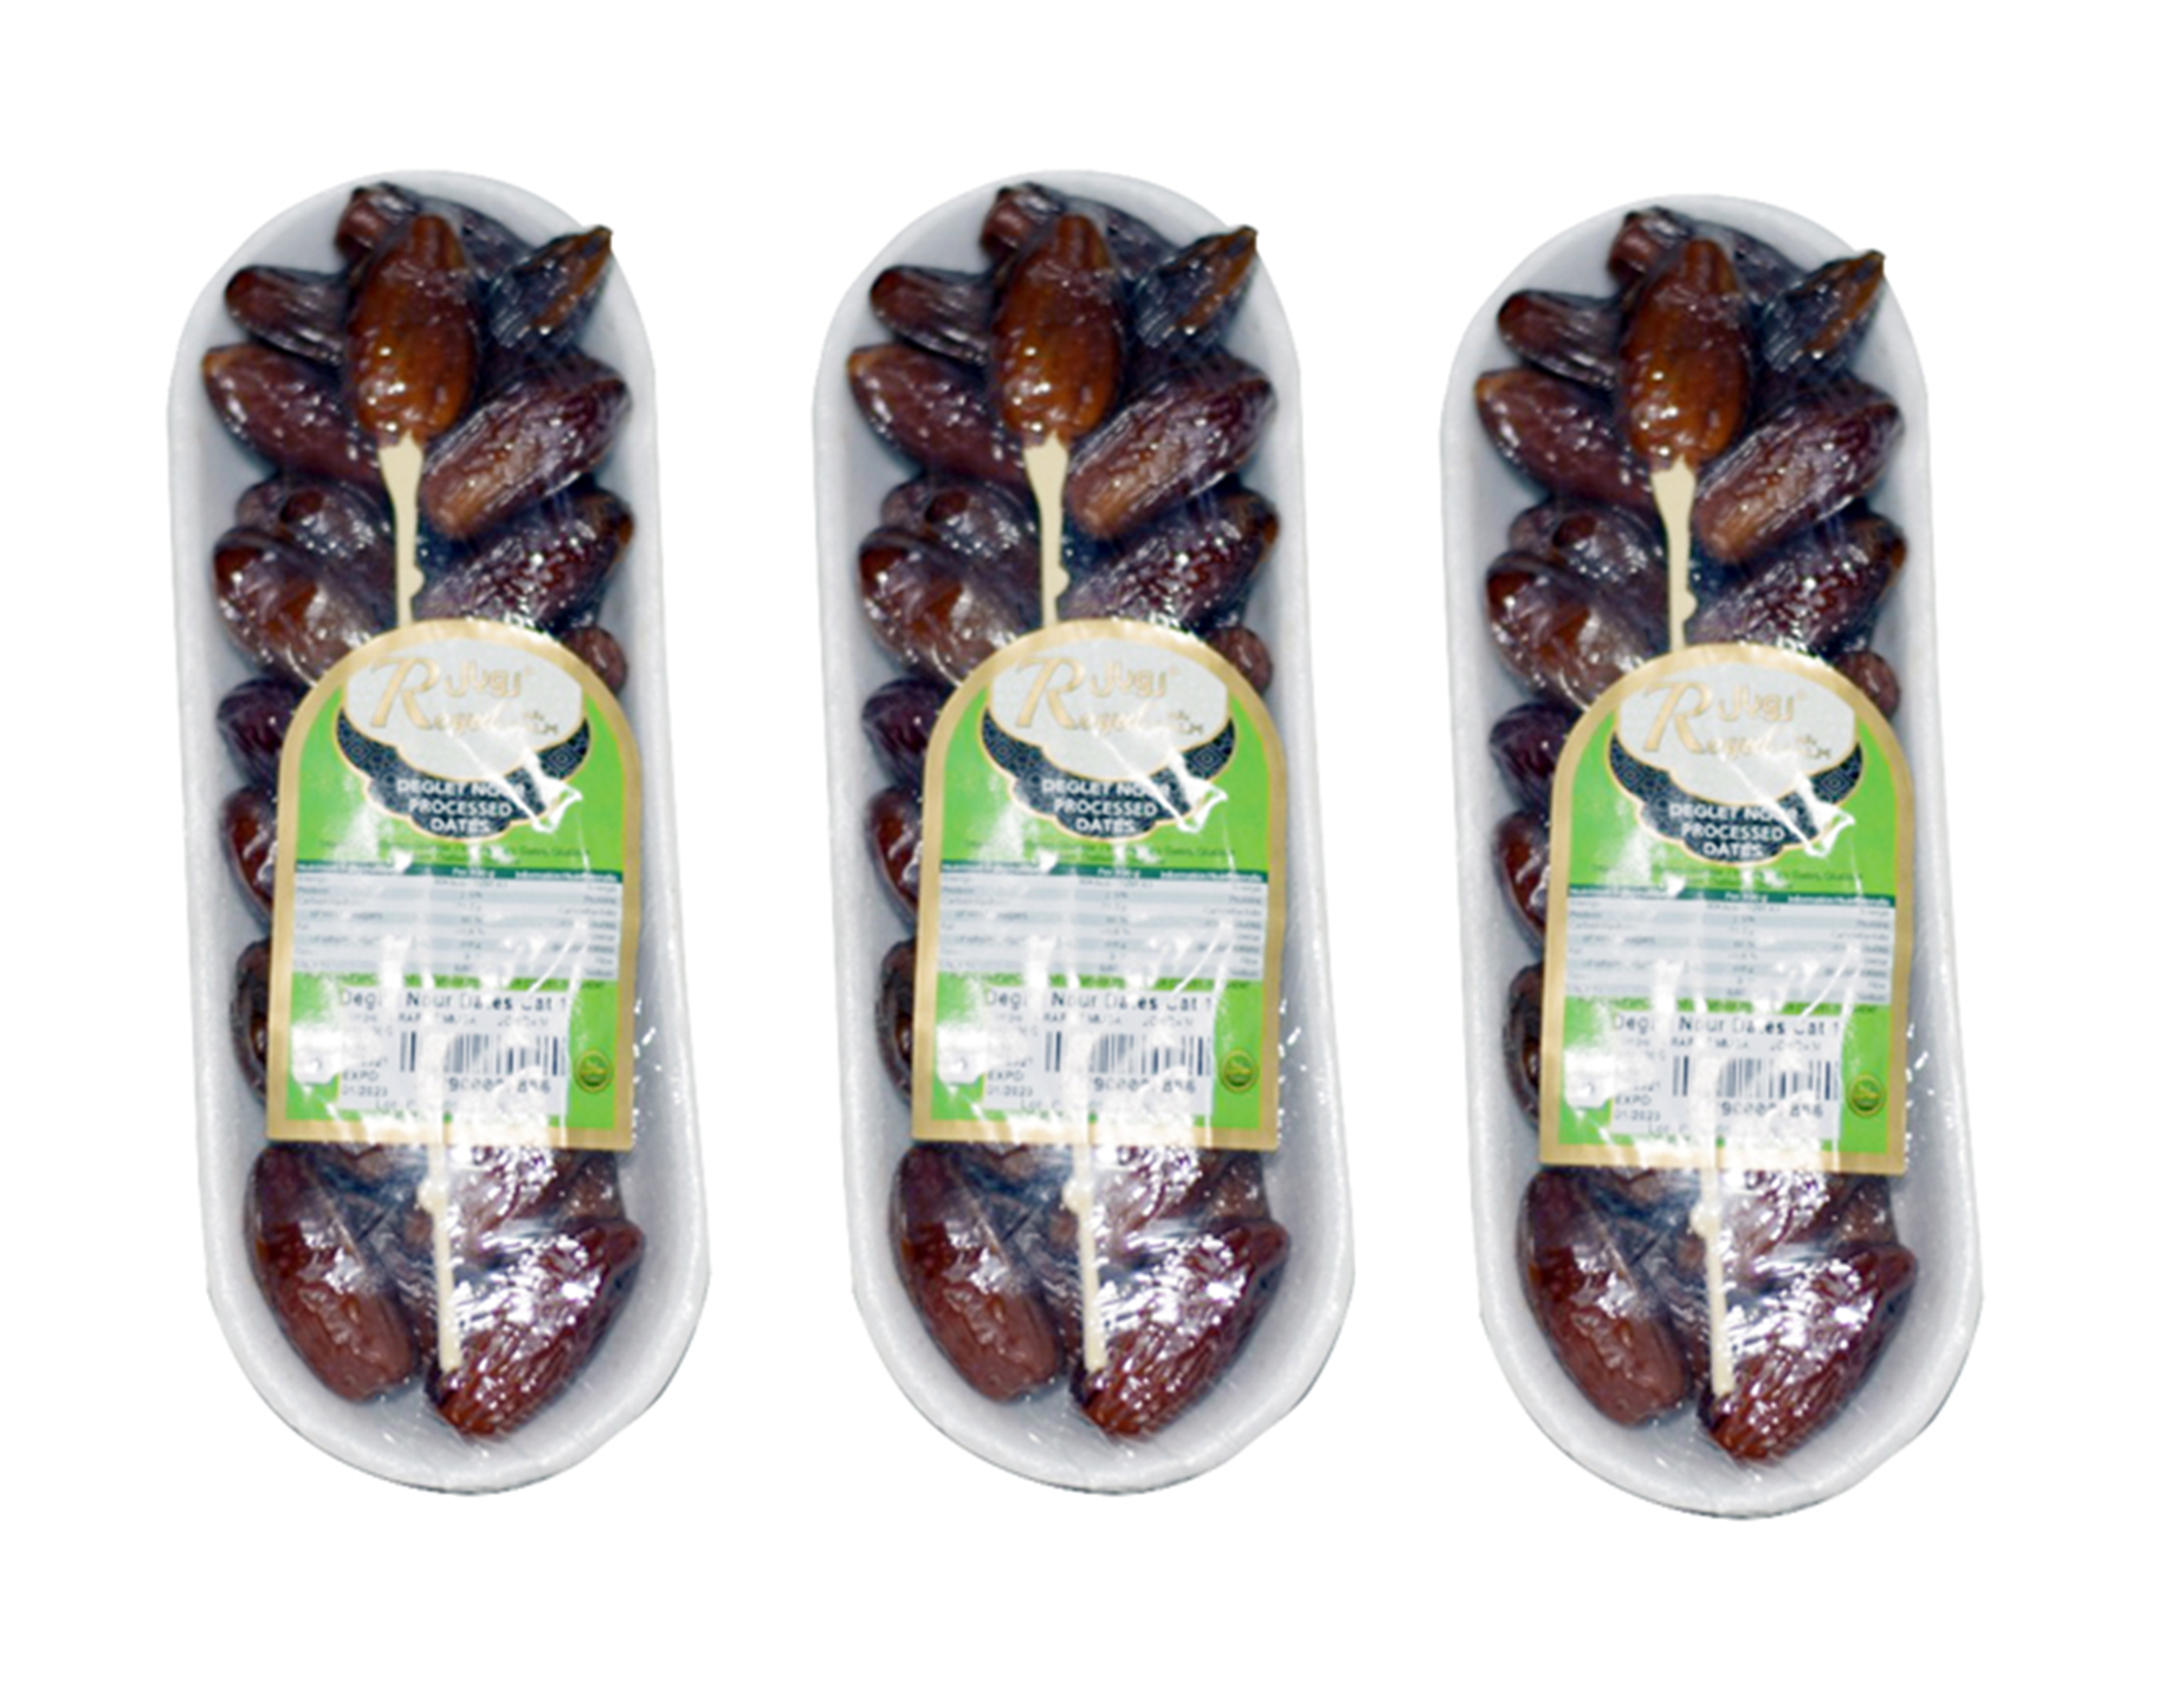 Royal Tunisian Dates 250g (Pack of 3)